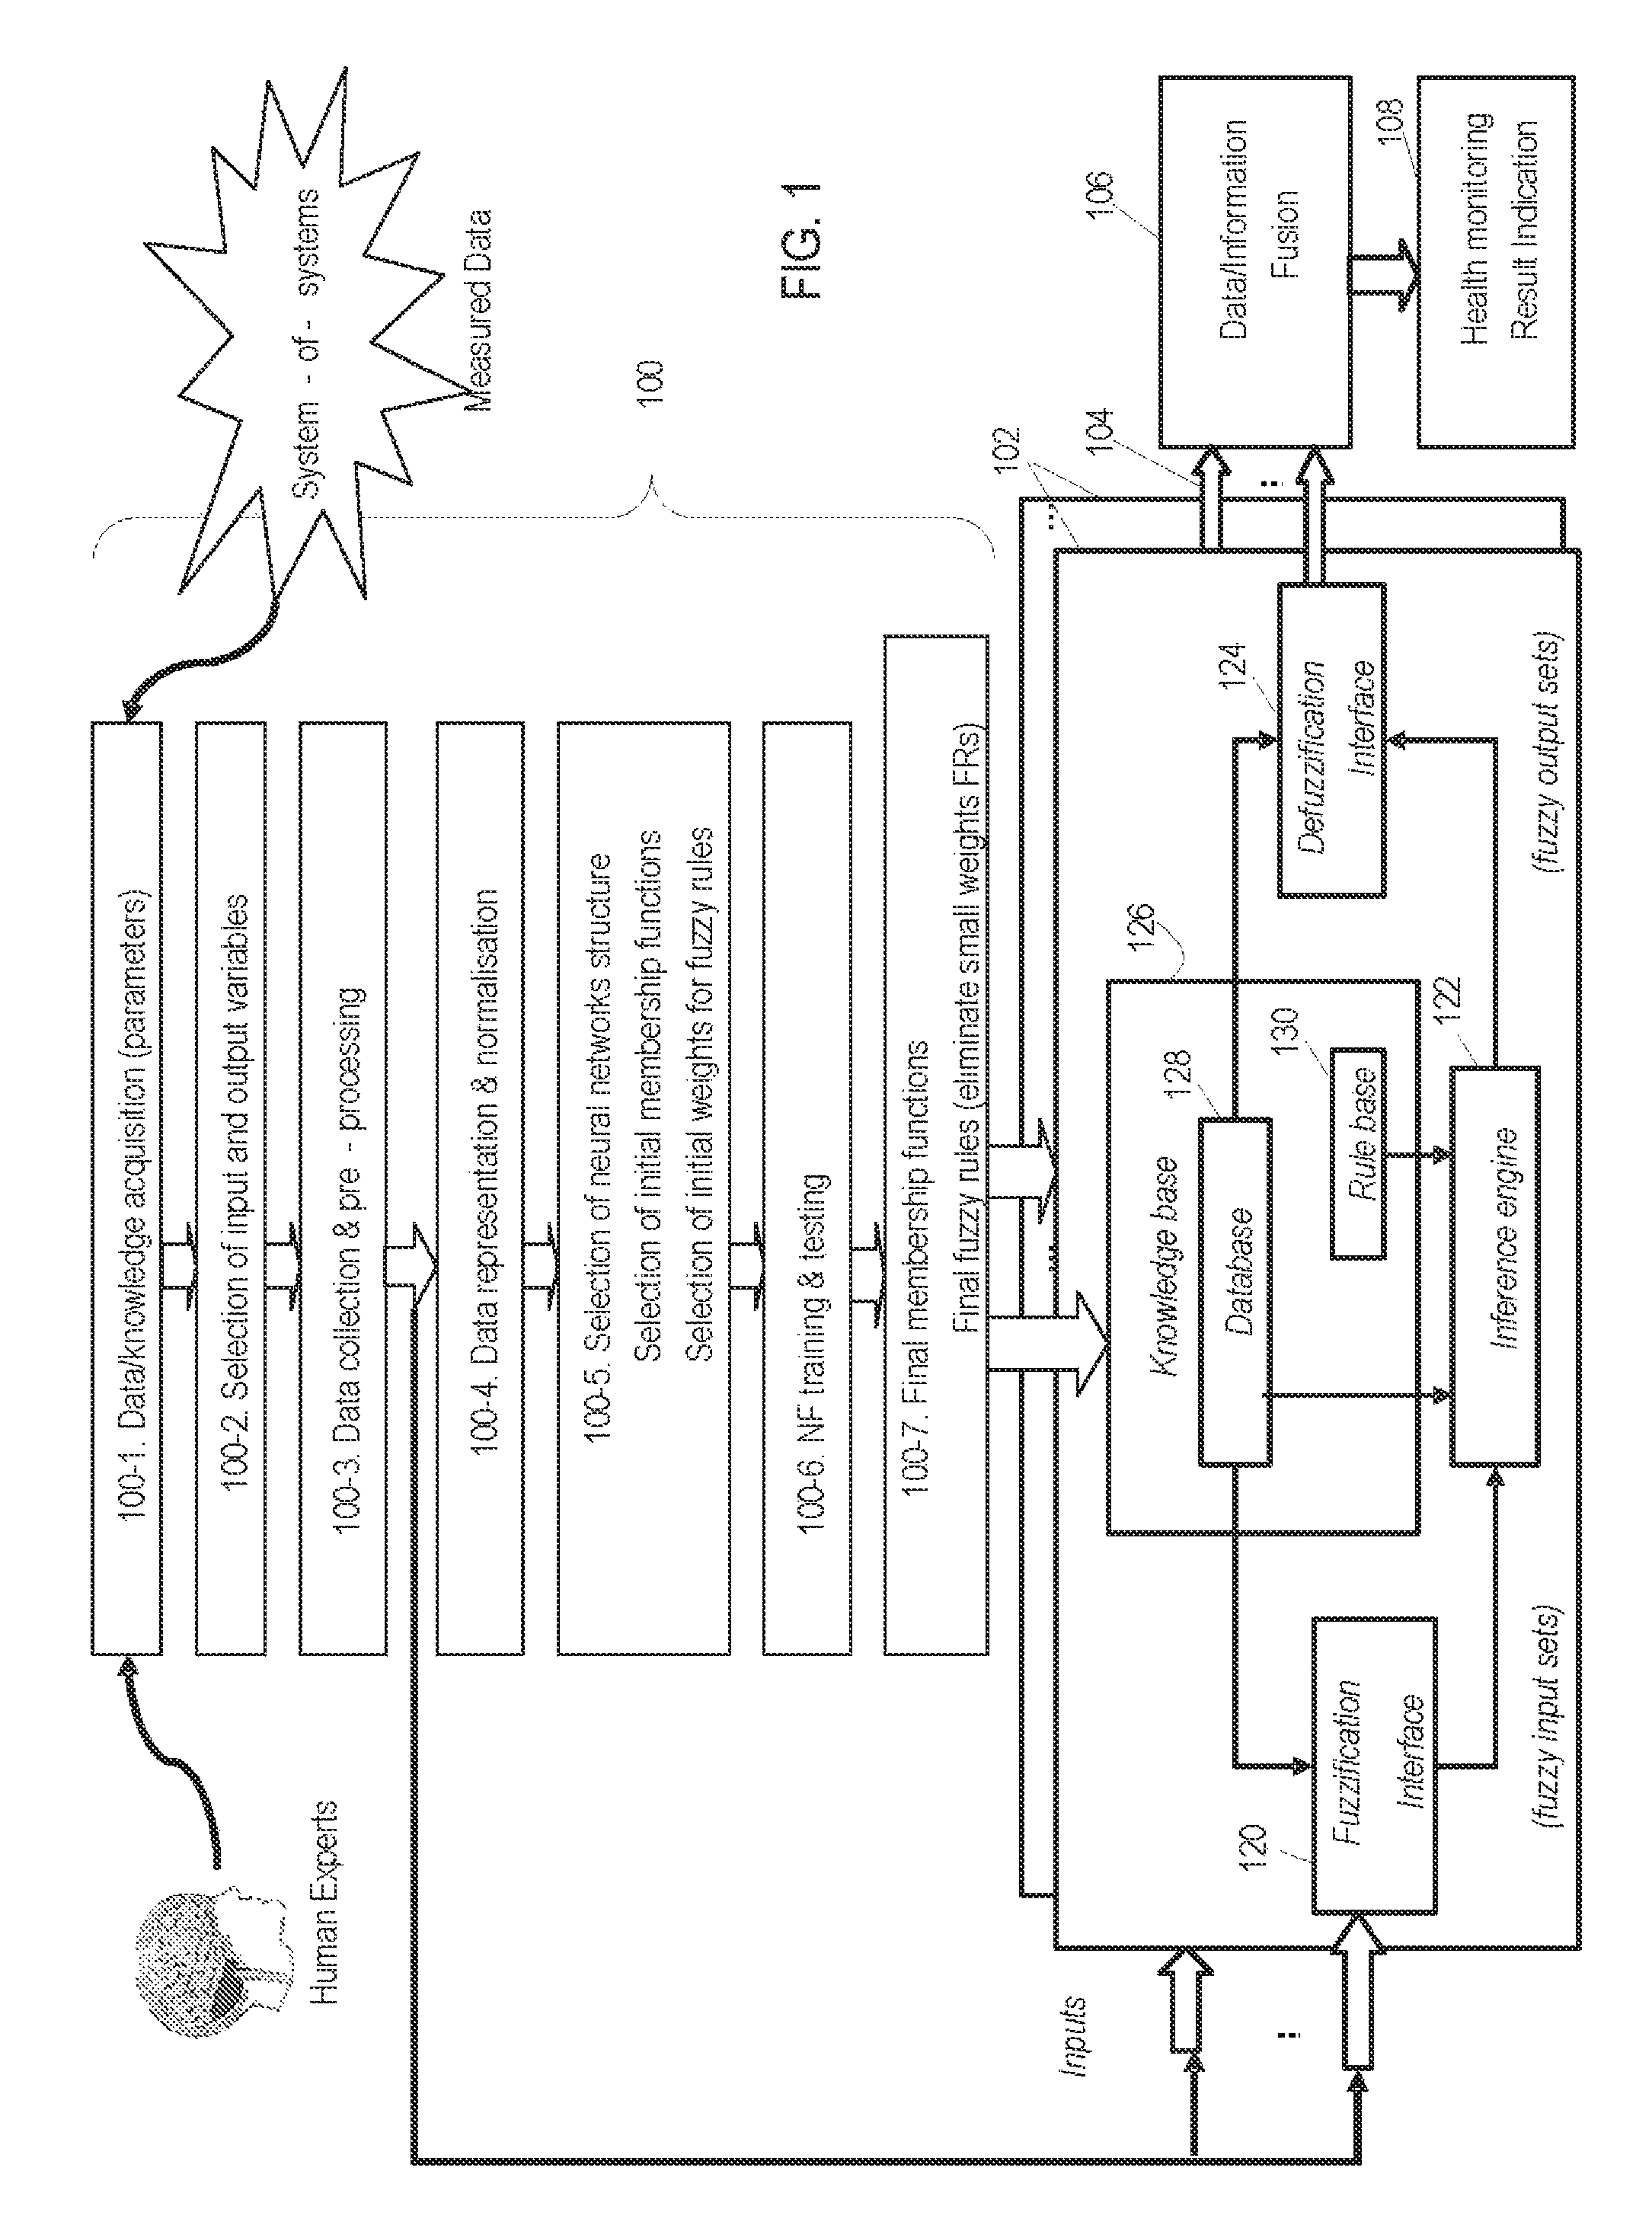 Fuzzy inference apparatus and methods, systems and apparatuses using such inference apparatus